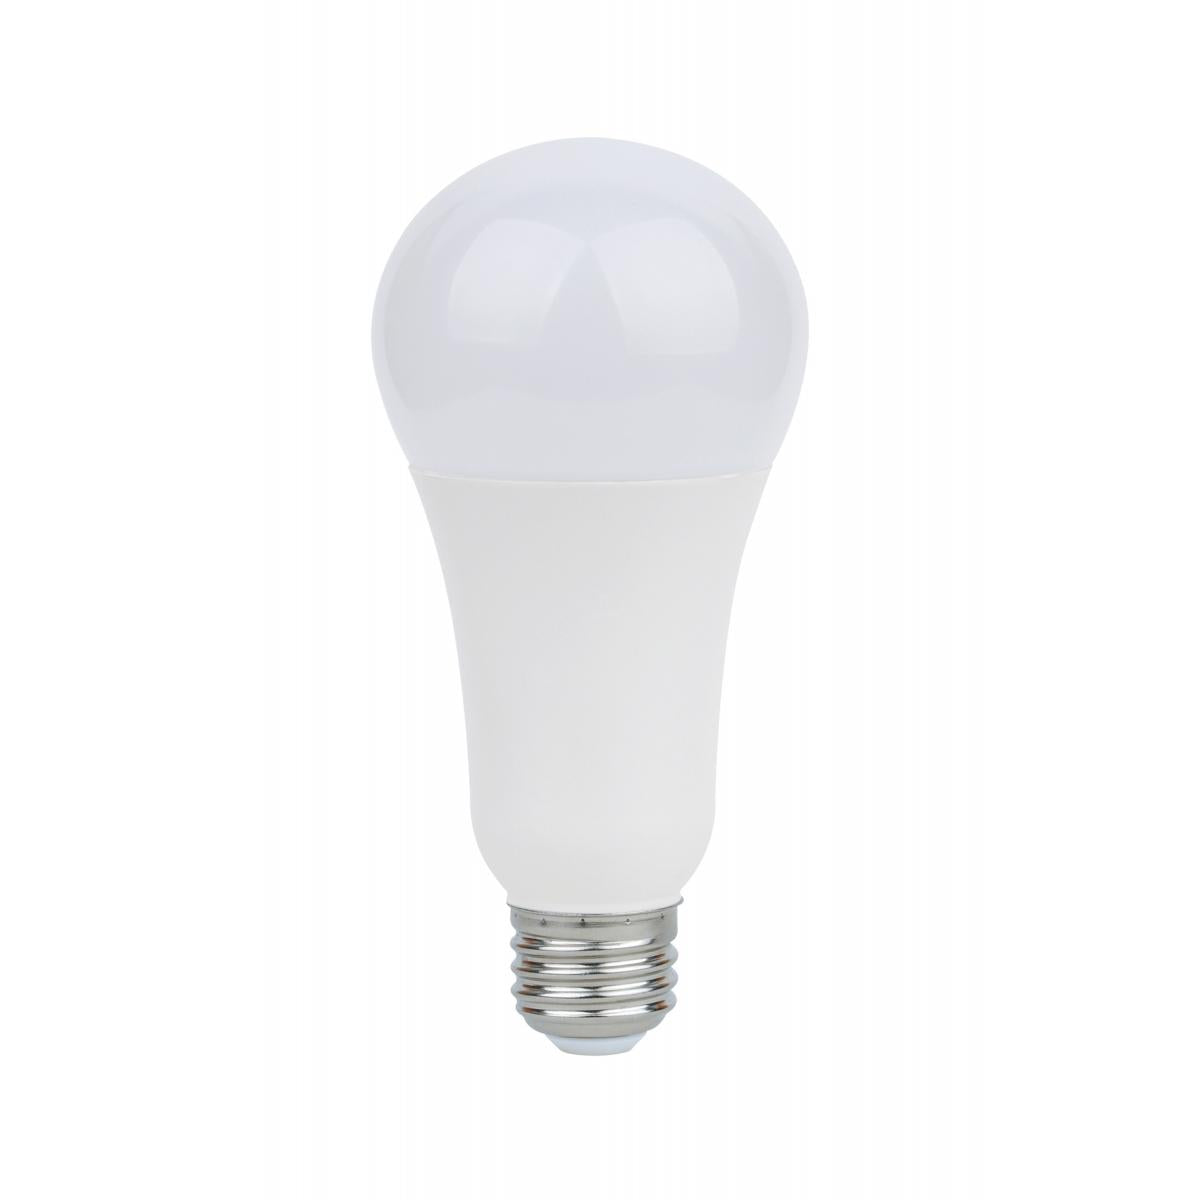 Replacement for Bulbrite 100201 200A/HL Incandescent 200W A23 FROST HL 120V - NOW LED S11329